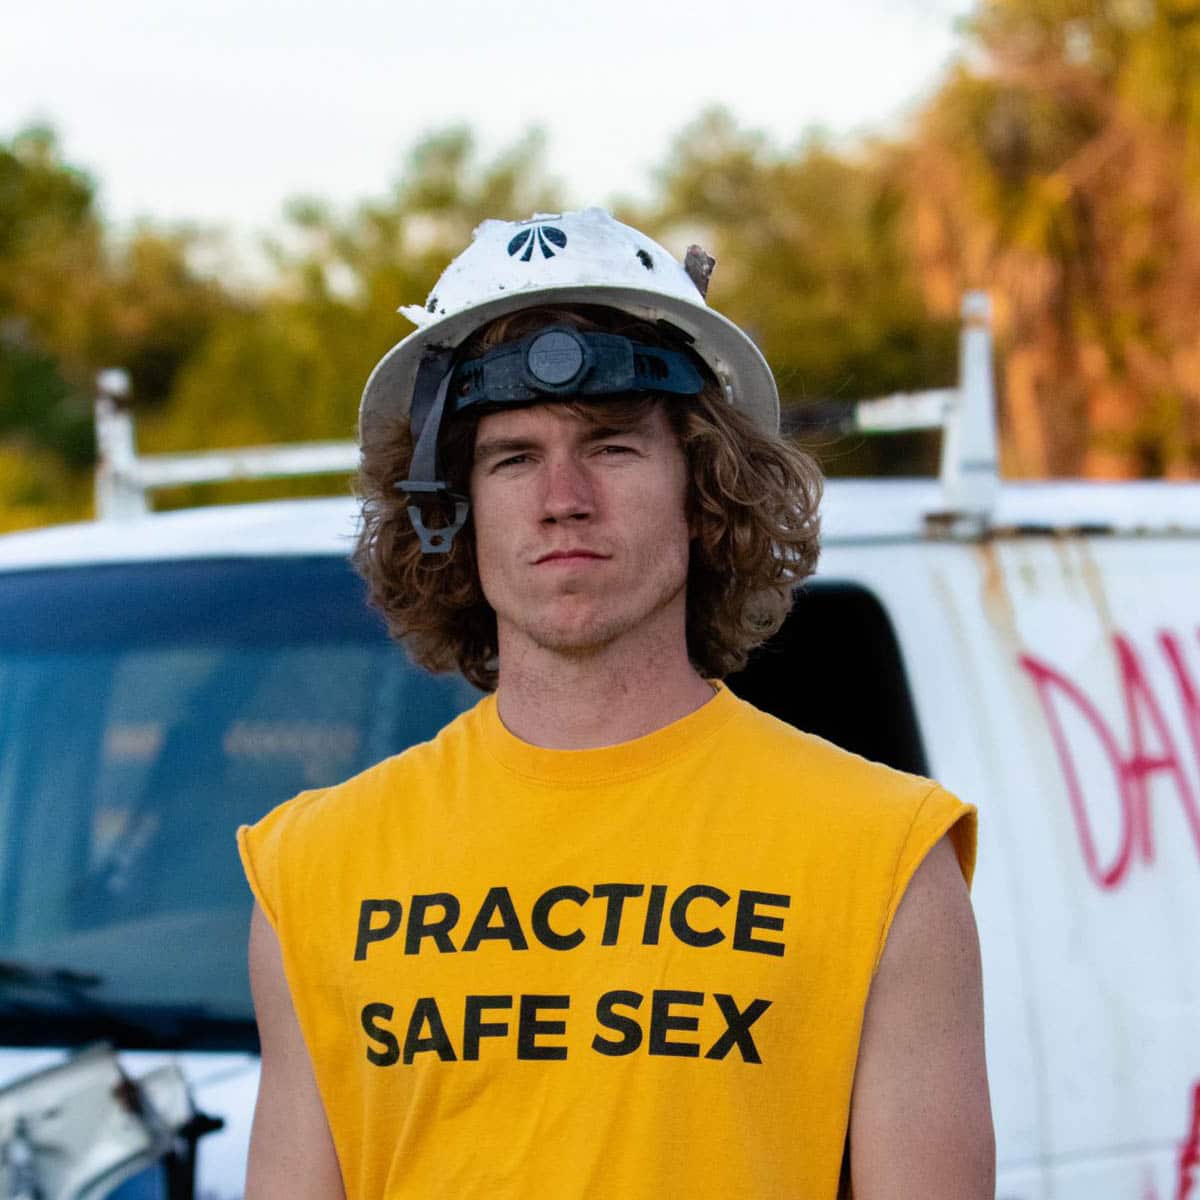 youtuber danny duncan poses with helmet and yellow shirt